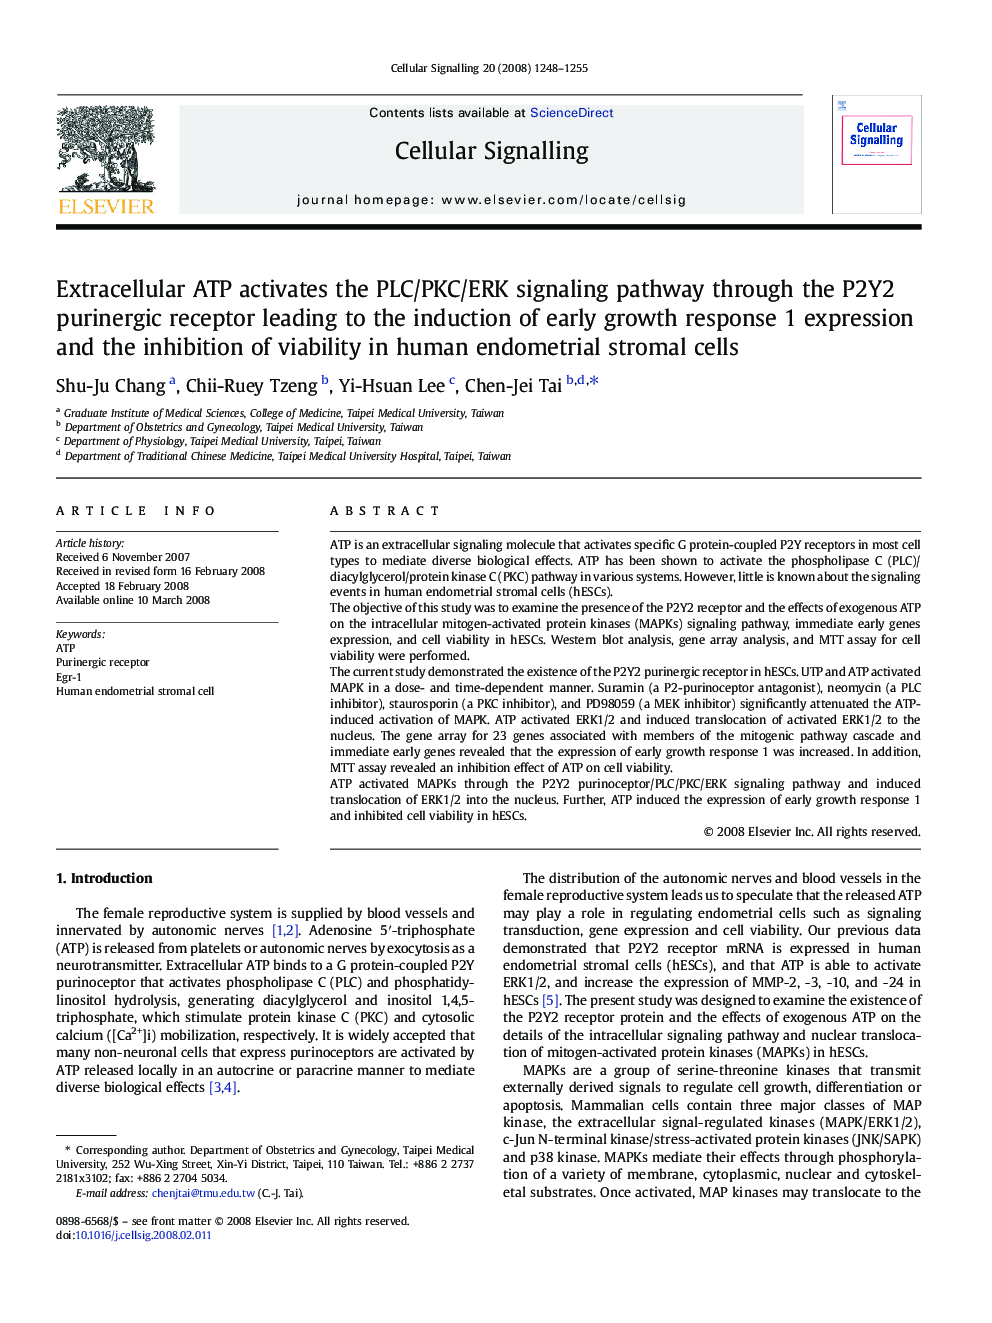 Extracellular ATP activates the PLC/PKC/ERK signaling pathway through the P2Y2 purinergic receptor leading to the induction of early growth response 1 expression and the inhibition of viability in human endometrial stromal cells